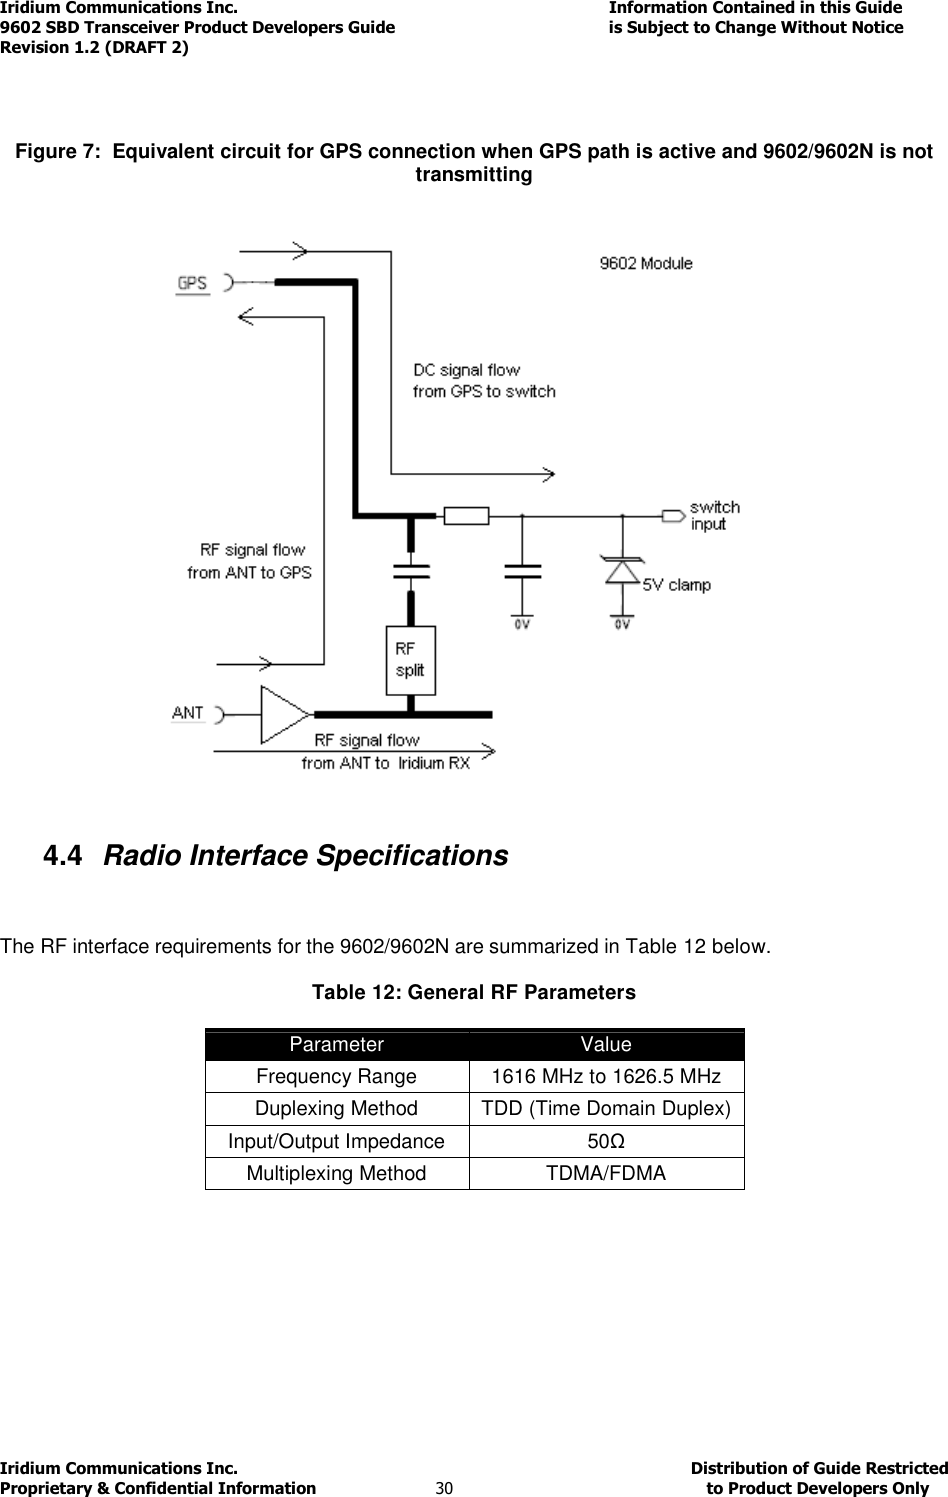 Iridium Communications Inc.                                      Information Contained in this Guide  9602 SBD Transceiver Product Developers Guide                                             is Subject to Change Without Notice  Revision 1.2 (DRAFT 2) Iridium Communications Inc.                                           Distribution of Guide Restricted Proprietary &amp; Confidential Information                         30                                                  to Product Developers Only              Figure 7:  Equivalent circuit for GPS connection when GPS path is active and 9602/9602N is not transmitting    4.4  Radio Interface Specifications  The RF interface requirements for the 9602/9602N are summarized in Table 12 below.  Table 12: General RF Parameters  Parameter  Value Frequency Range  1616 MHz to 1626.5 MHz Duplexing Method  TDD (Time Domain Duplex) Input/Output Impedance  50Ω Multiplexing Method  TDMA/FDMA         